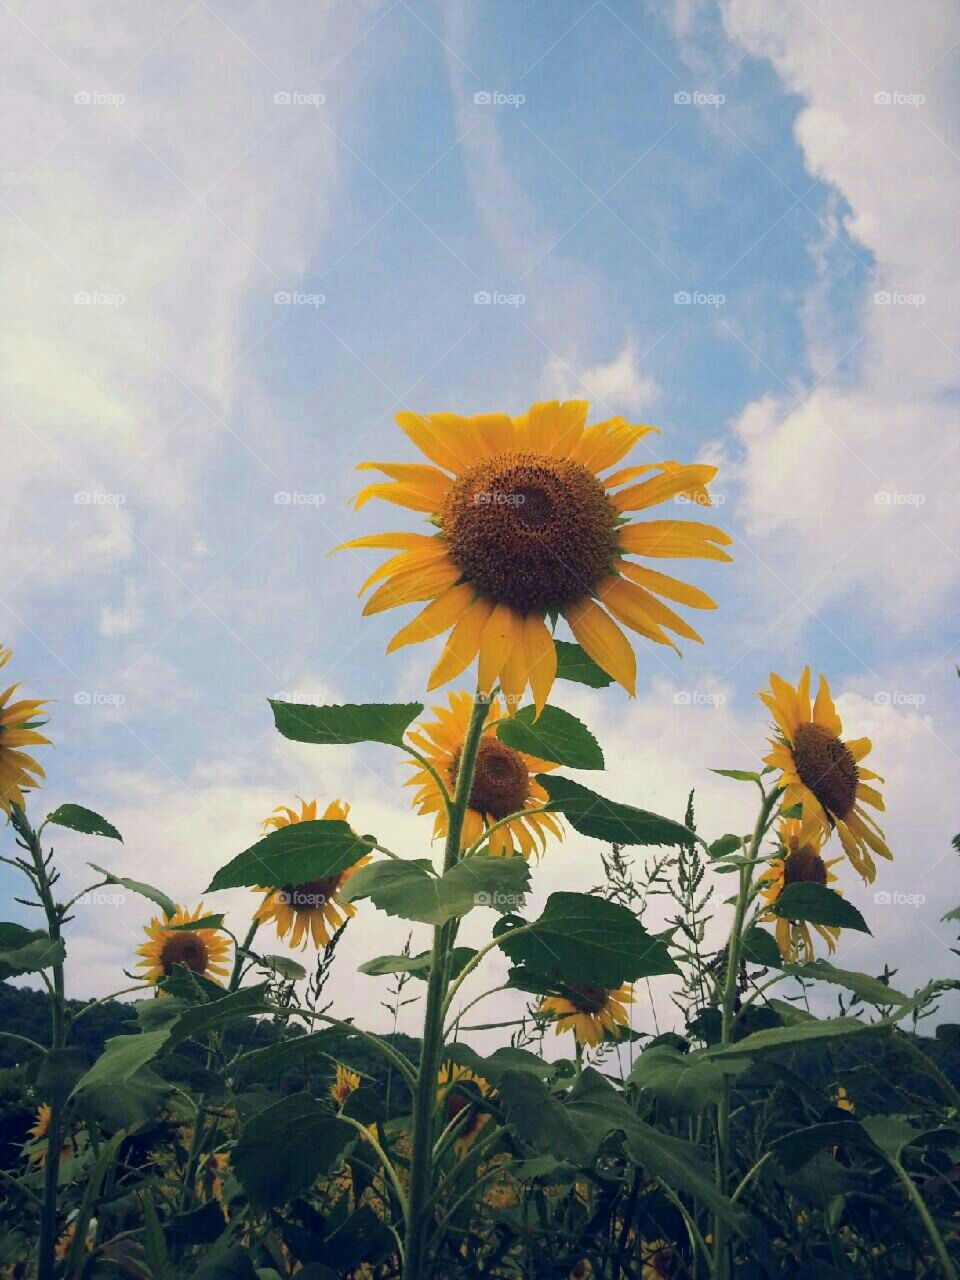 Sunflower field. I took this shot while I was walking in the fields in the aera of Paris this late summer 2015